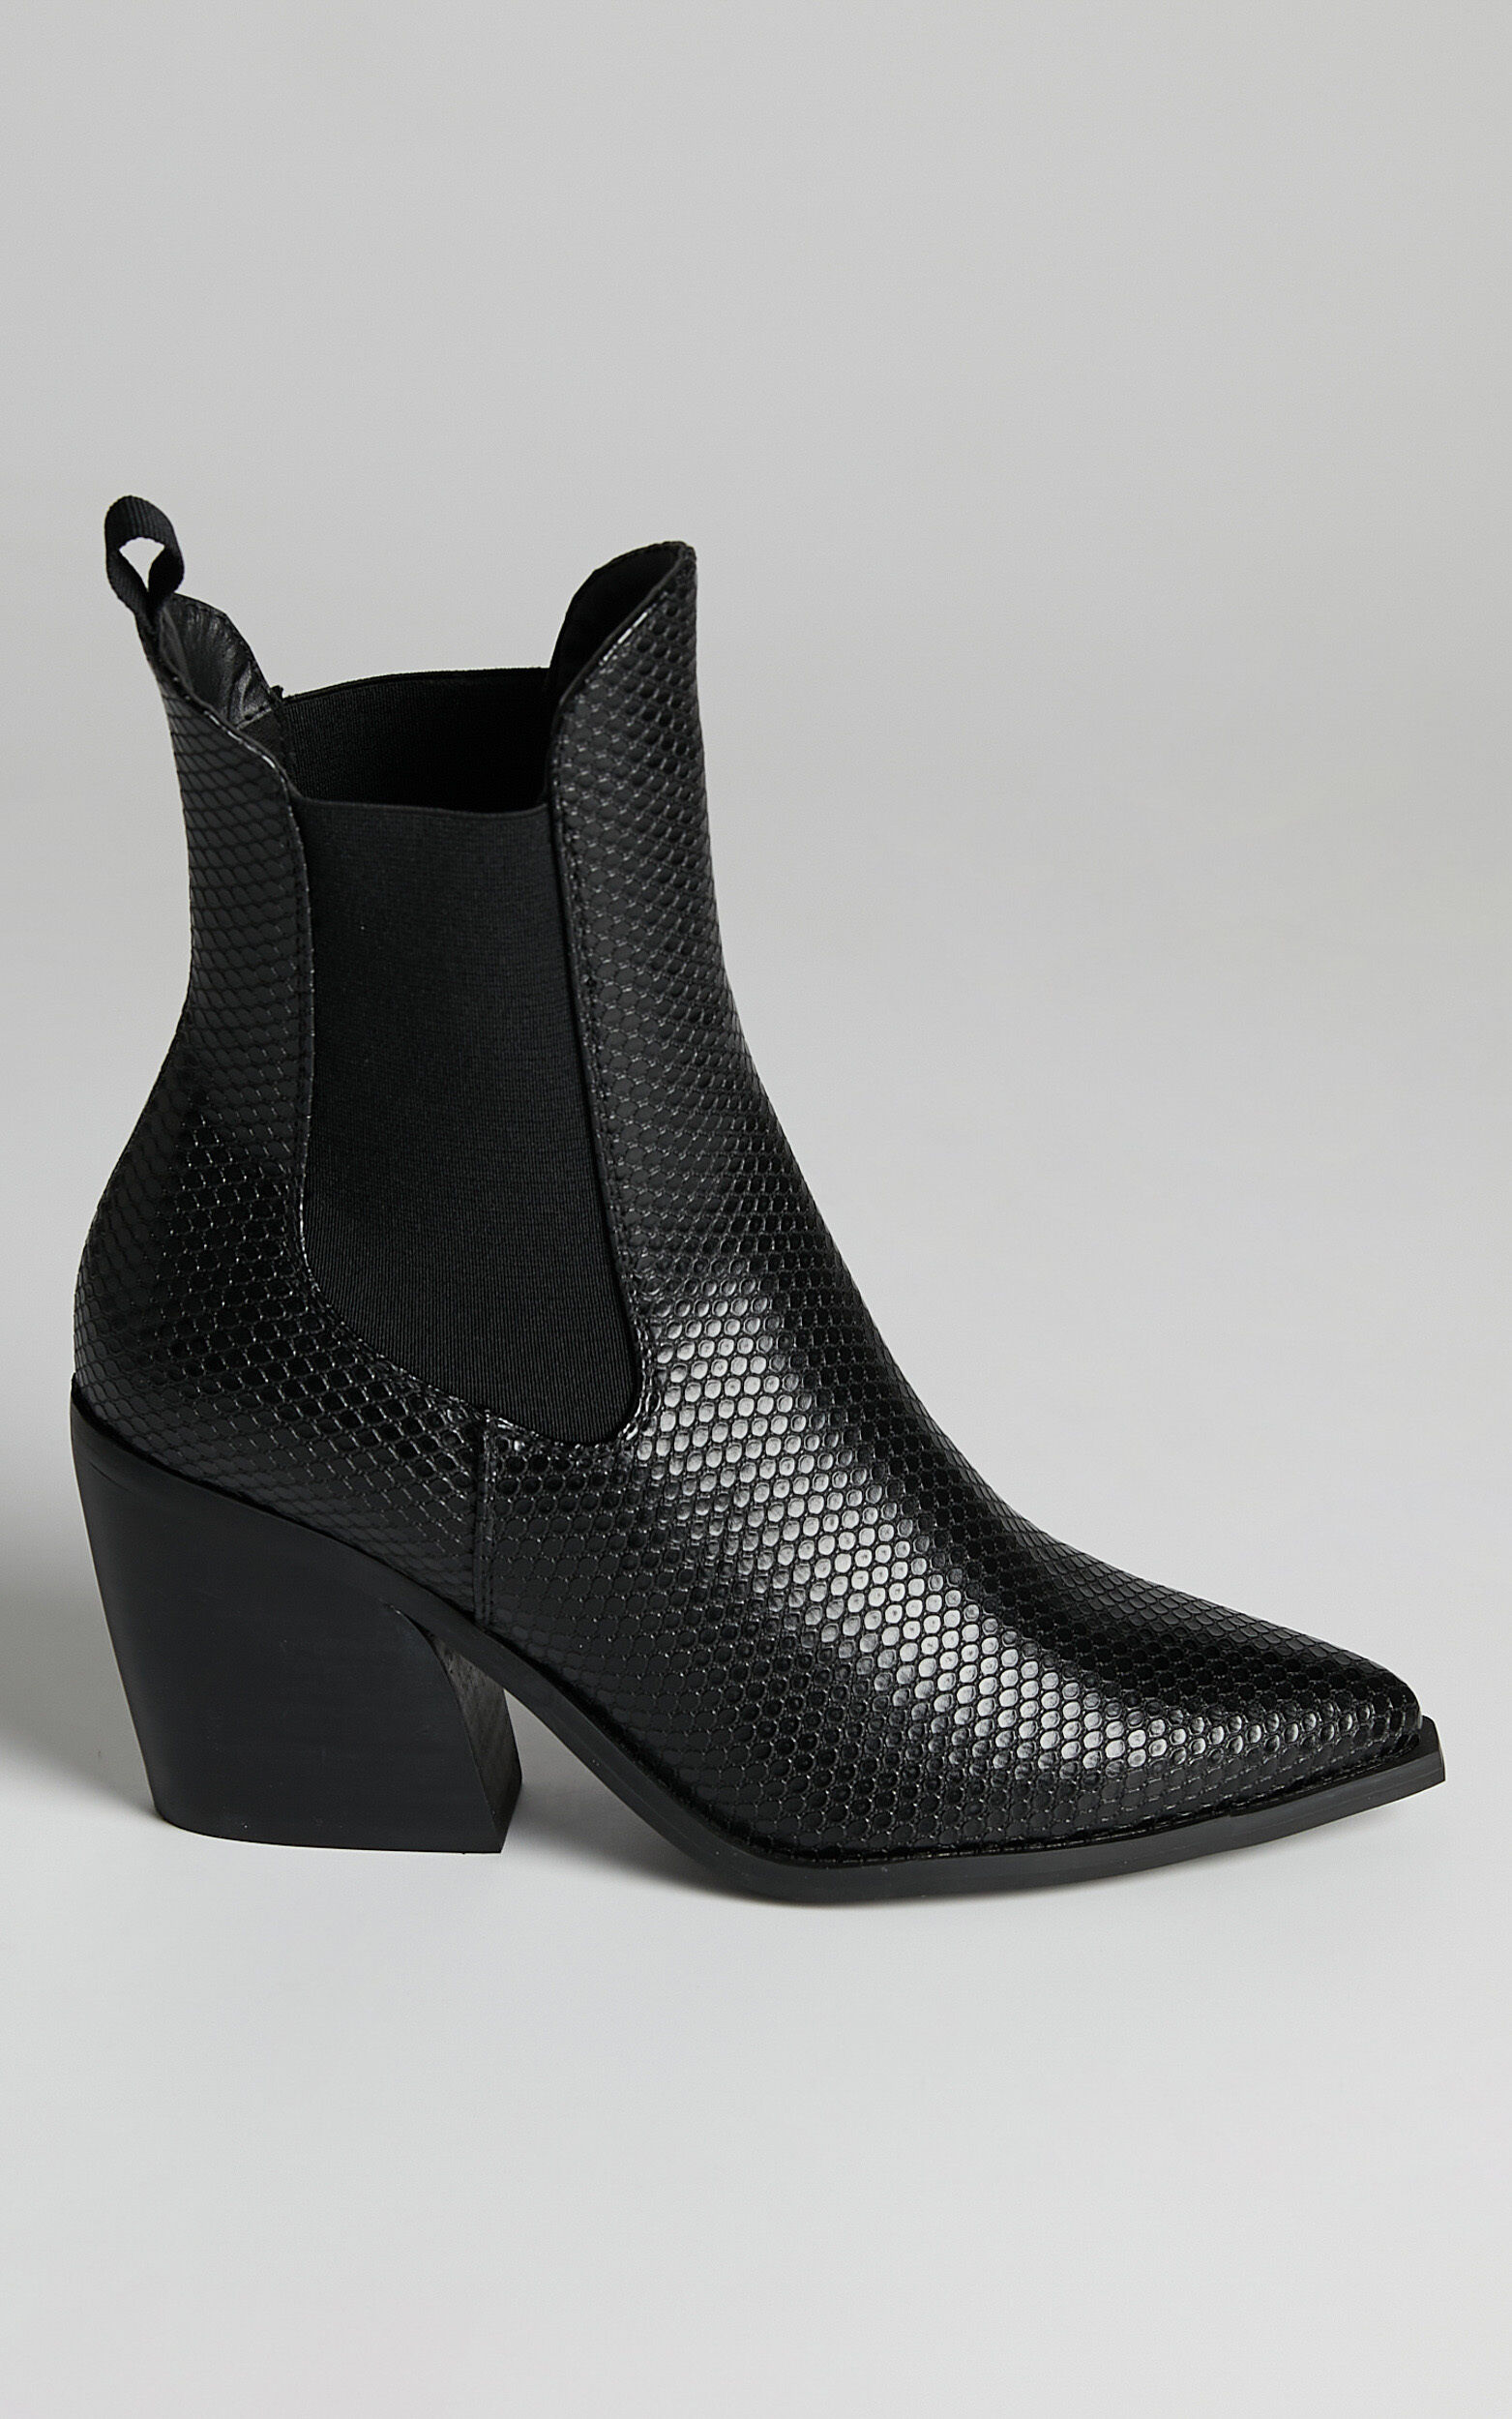 Therapy - Josette Boots in Black Snake - 05, BLK1, super-hi-res image number null